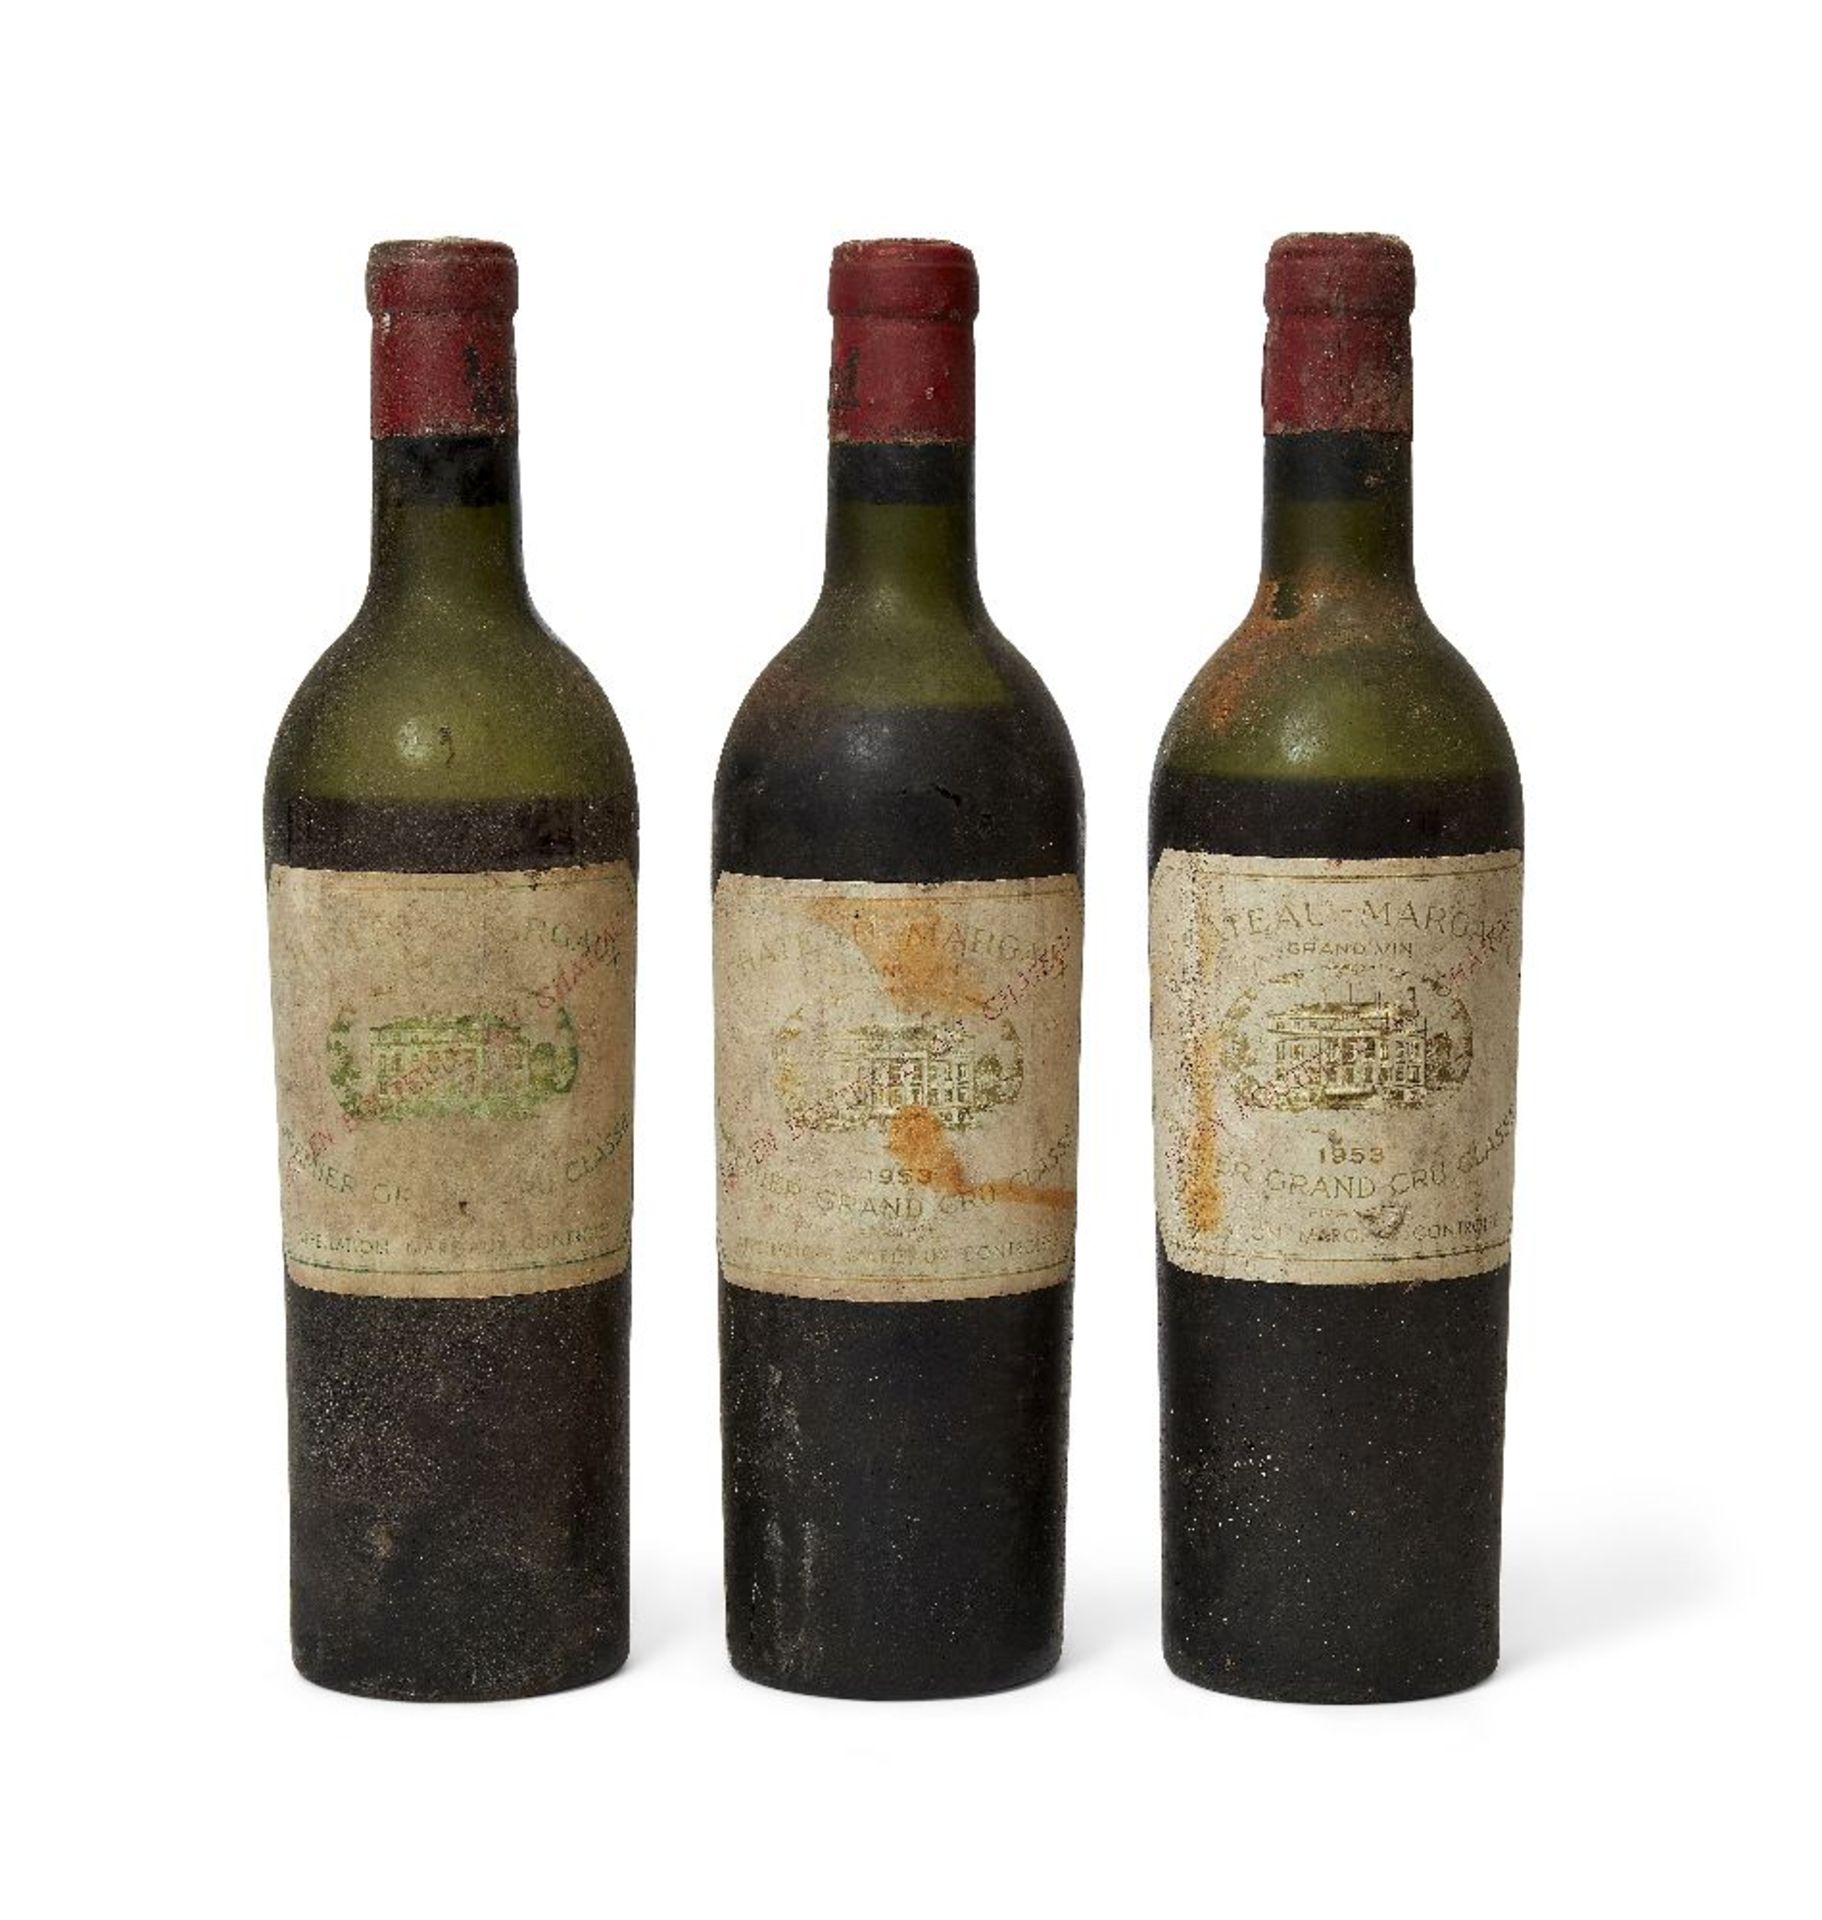 1953 Chateau Margaux, two bottles, together with a further single bottle of Chateau Margaux, unknown